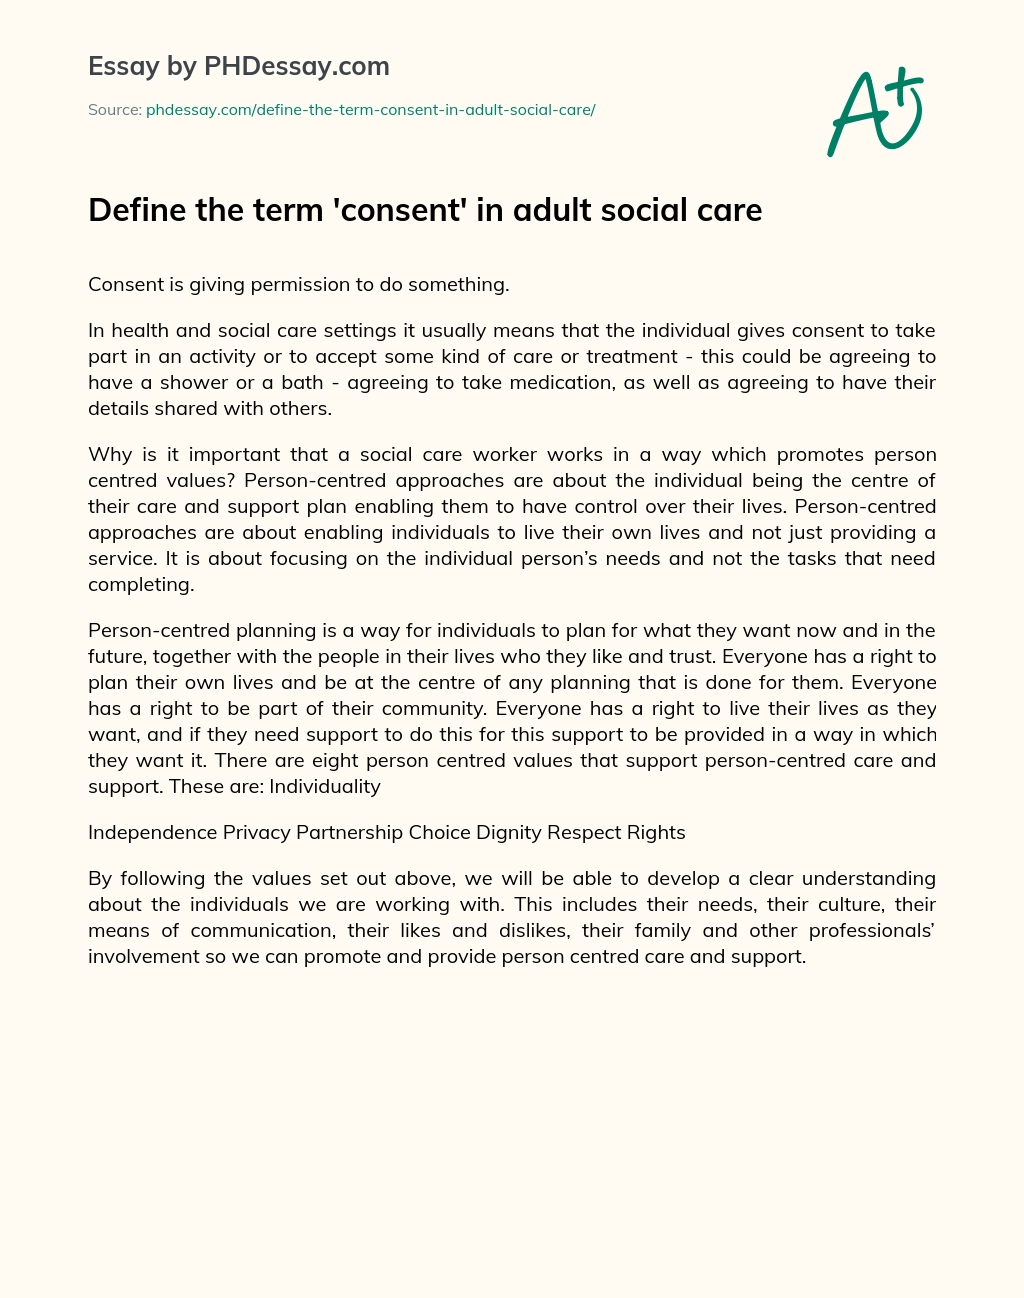 Define the term ‘consent’ in adult social care